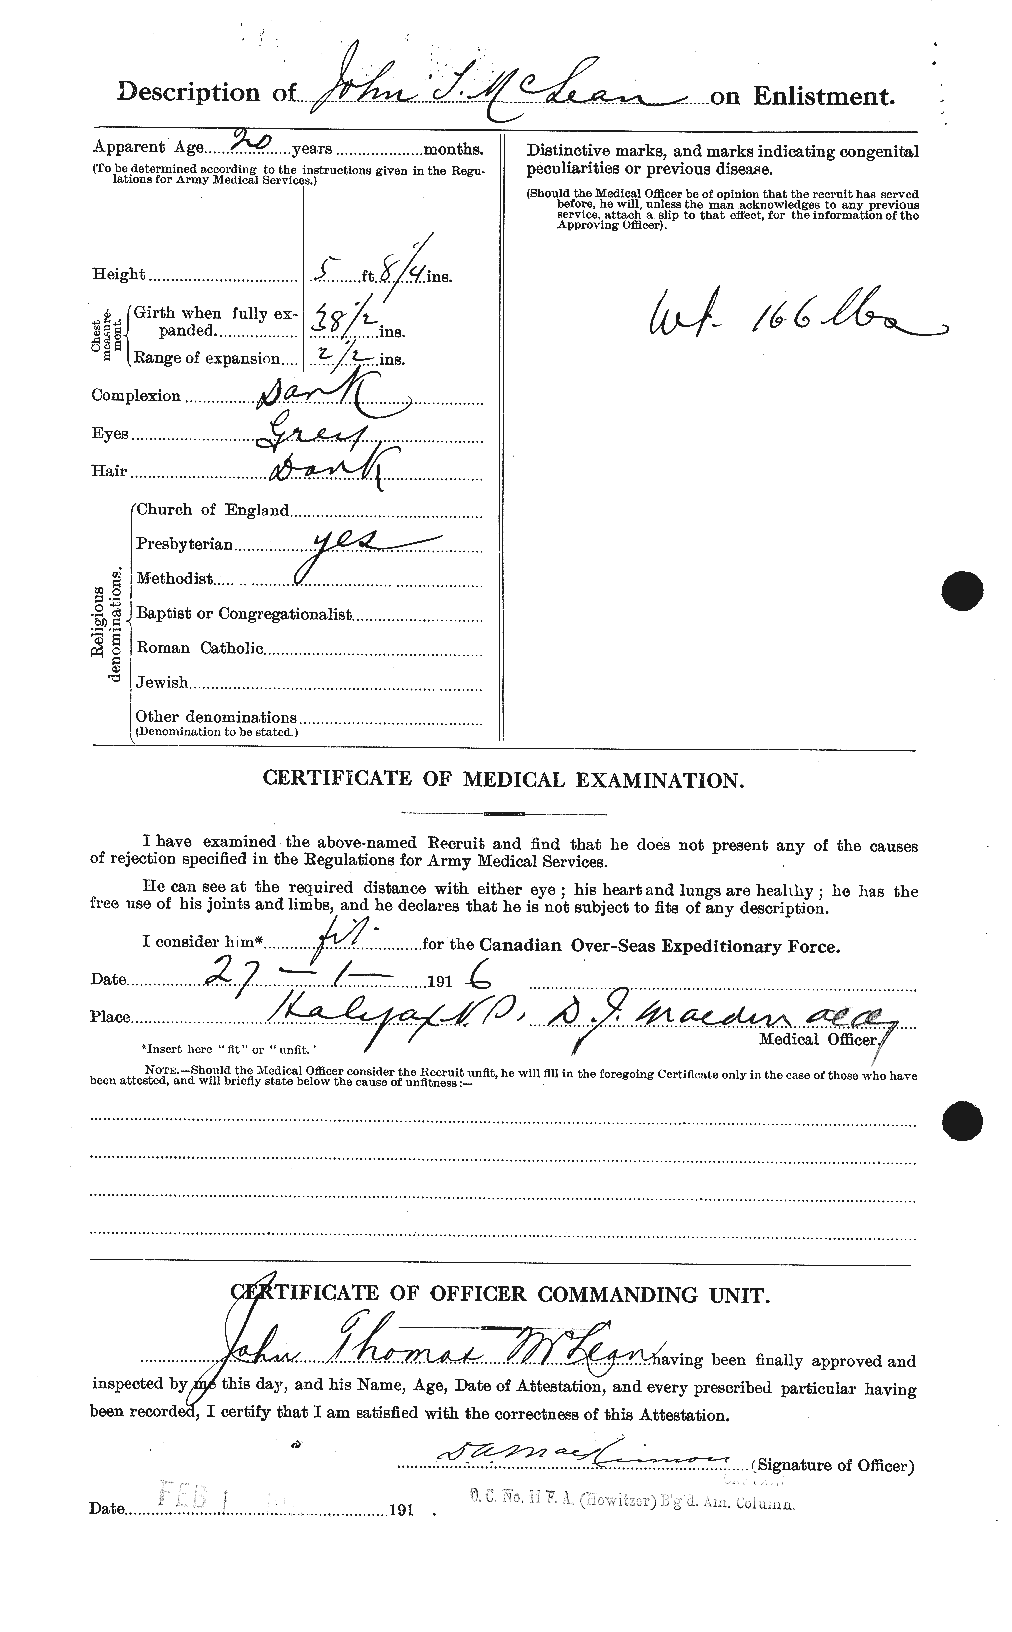 Personnel Records of the First World War - CEF 531883b